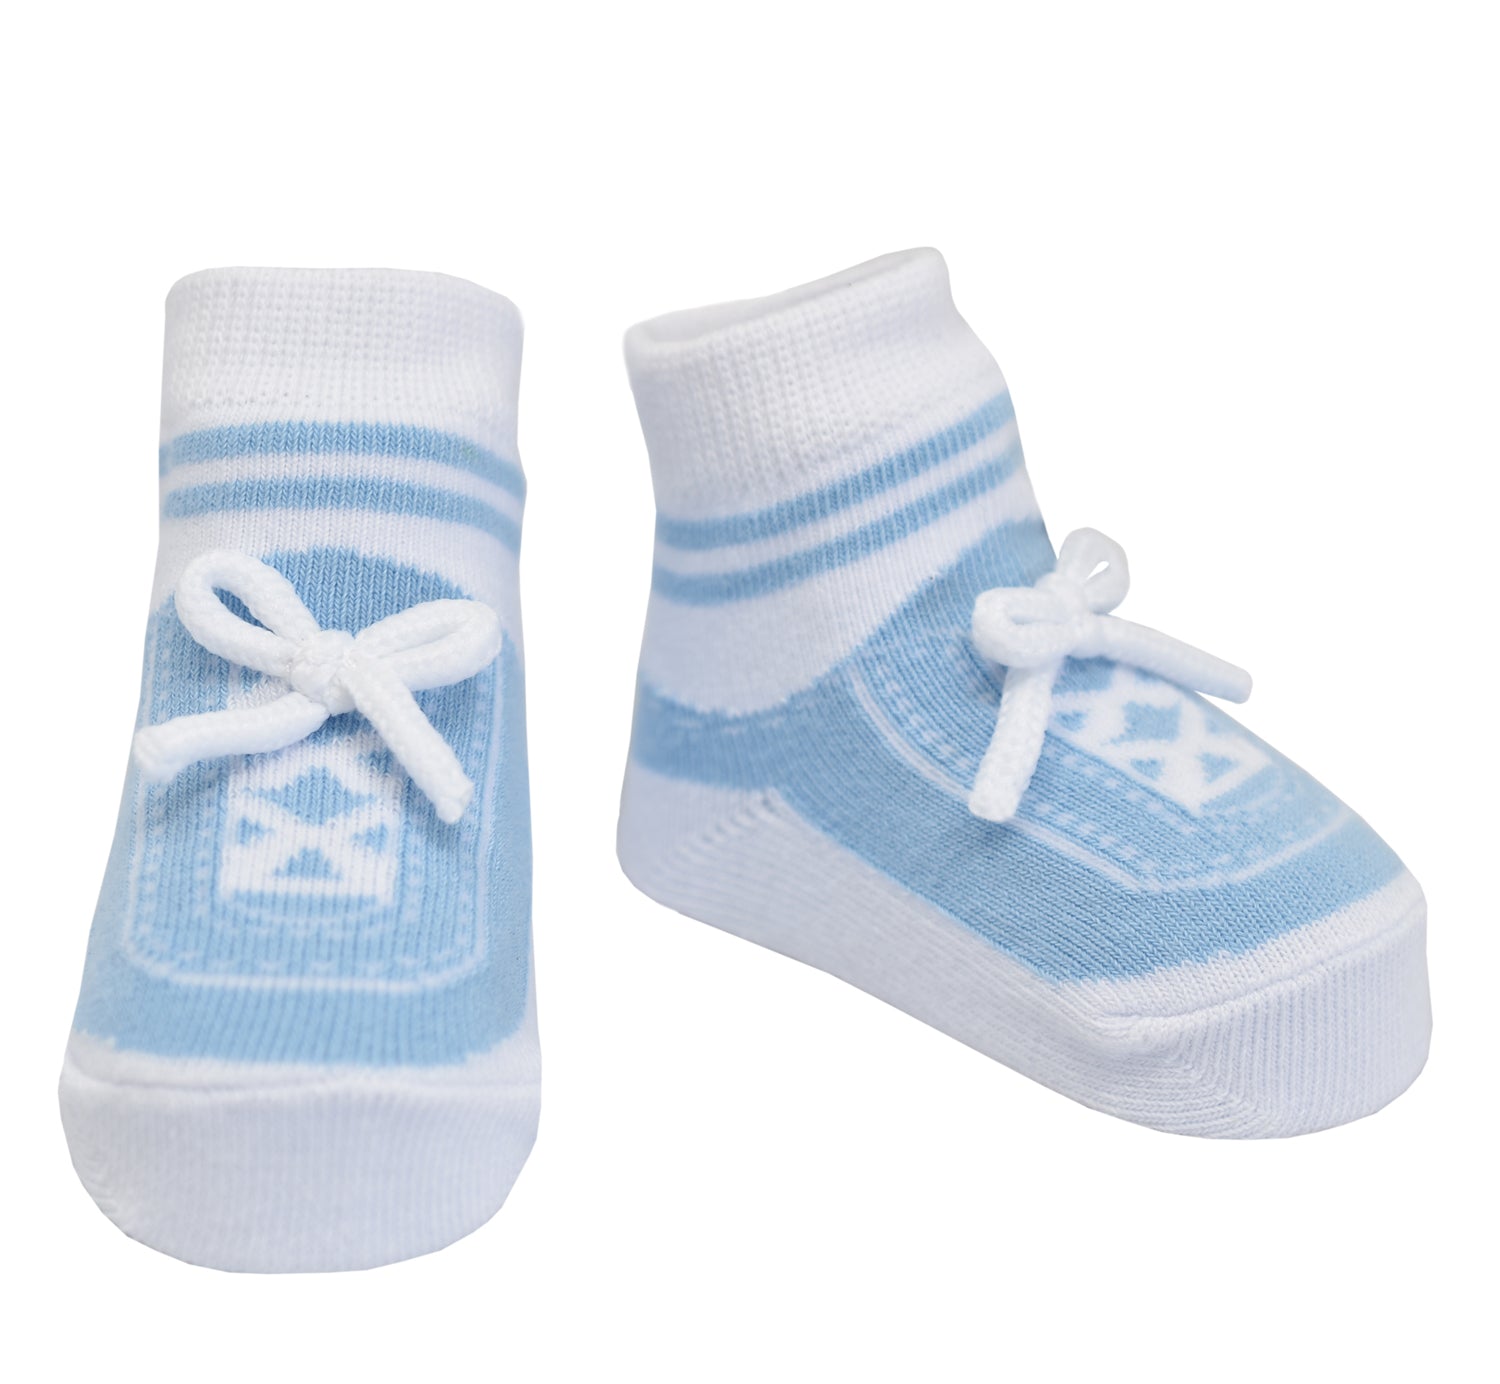 Light blue baby boy socks that look like shoes baby shower gift